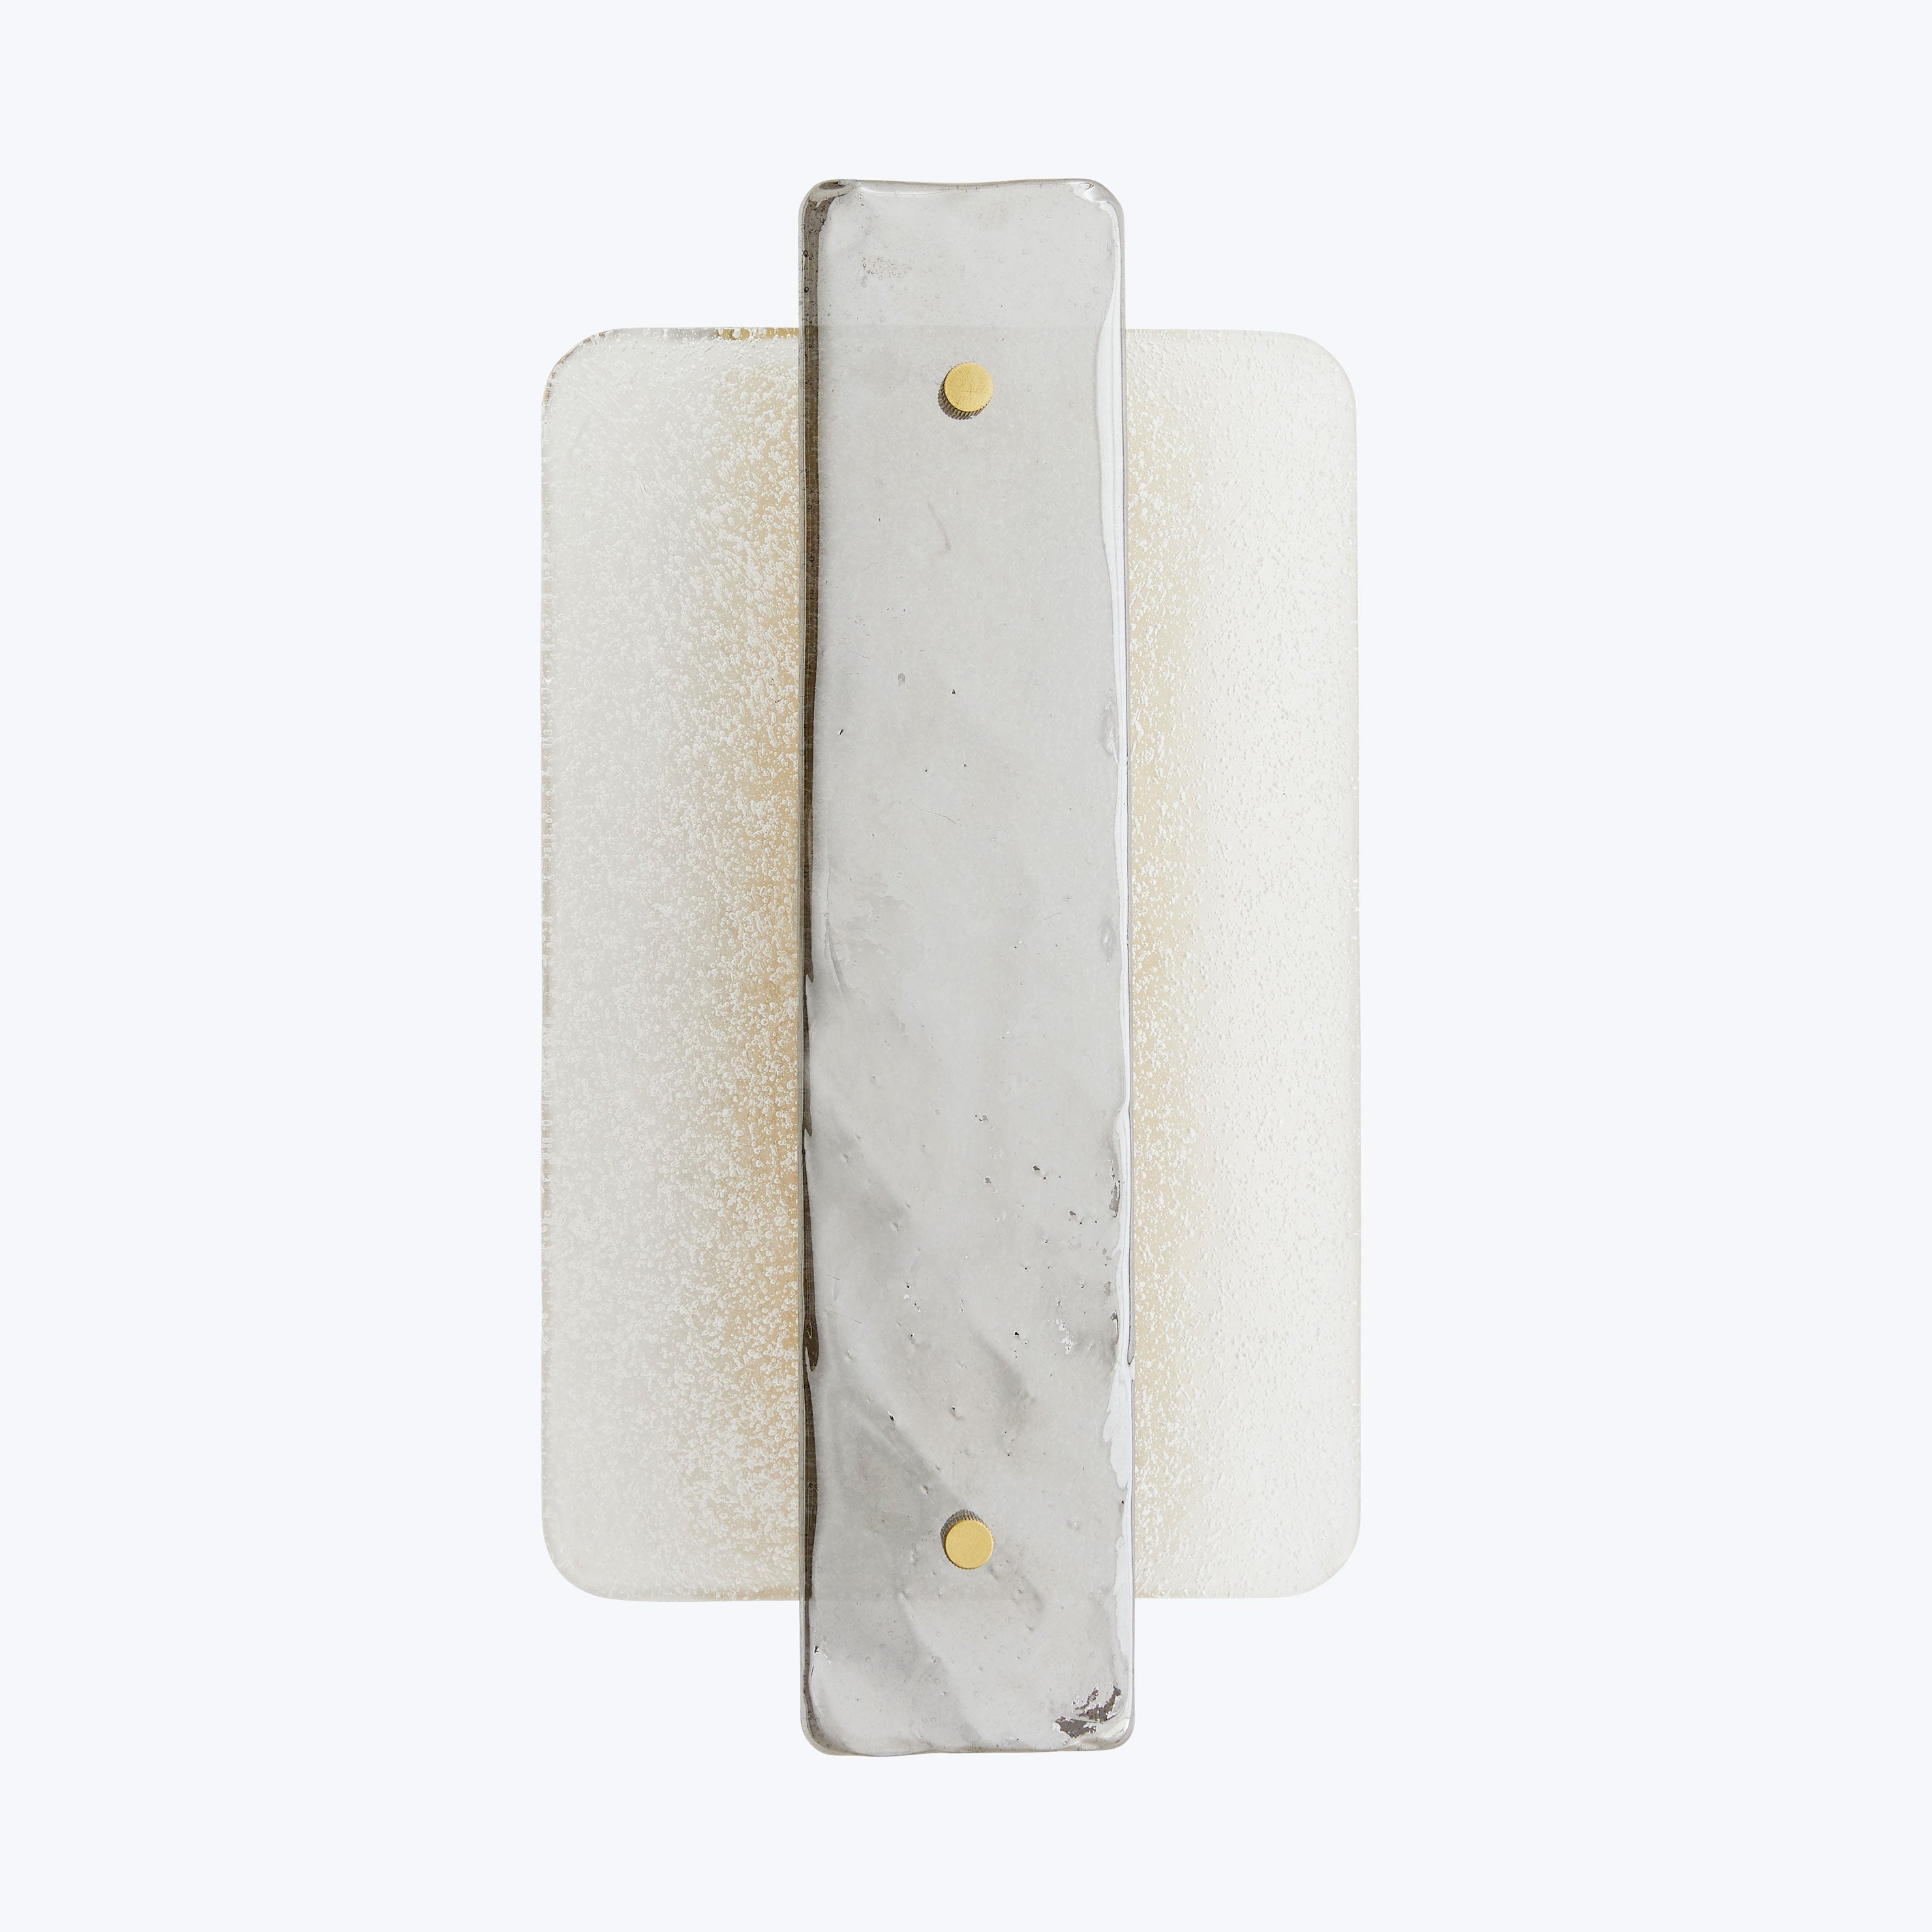 Three-layered object with metal strip and textured white sandwiching layers.